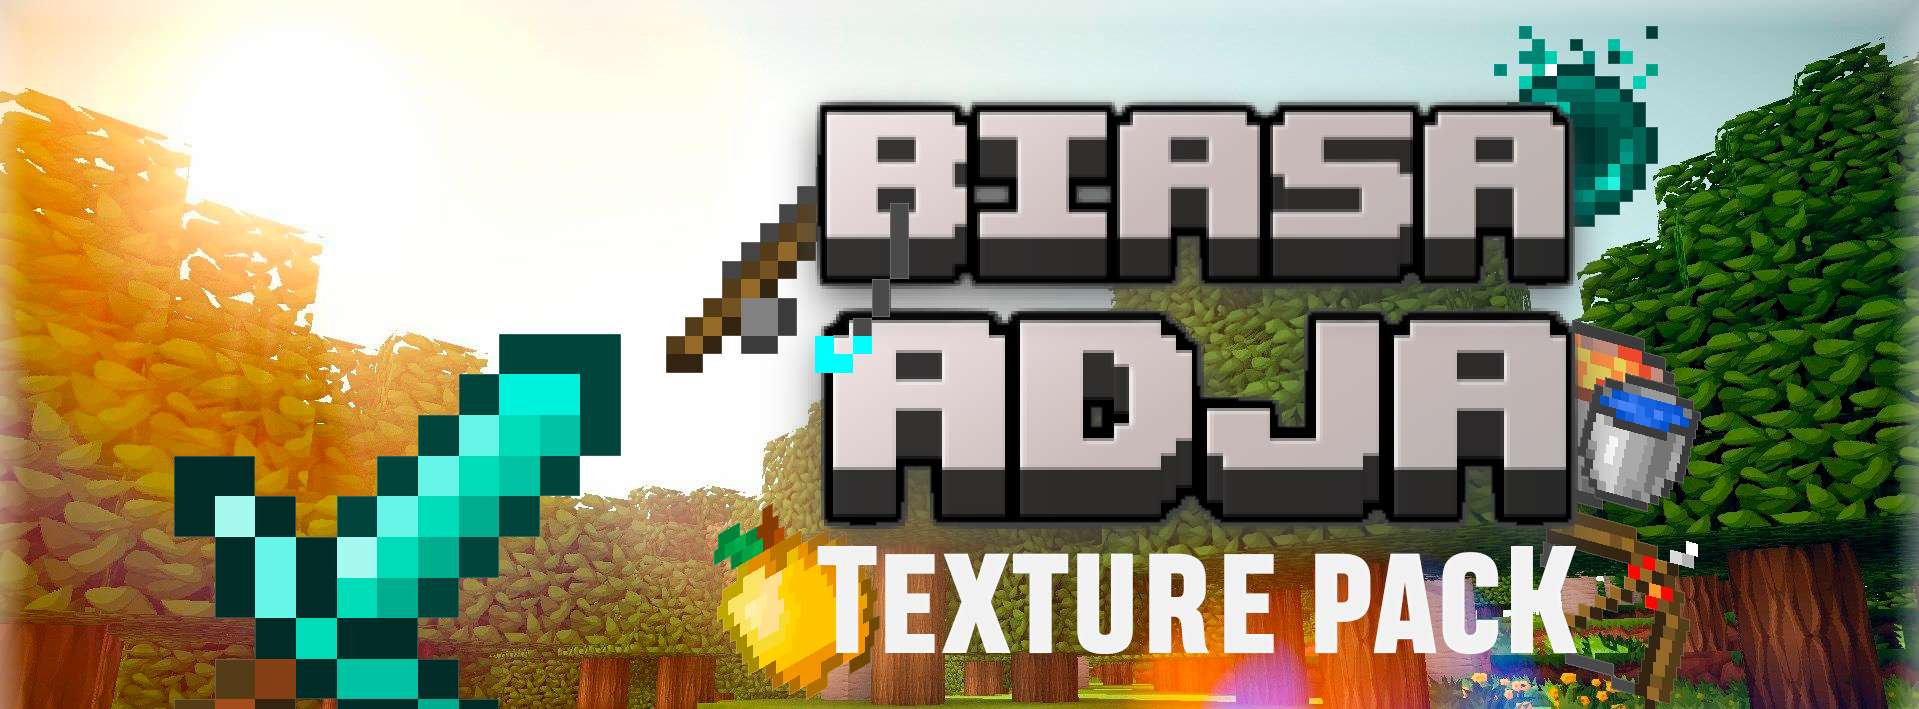 Gallery Banner for Biasa Adja Texture Pack V5 on PvPRP